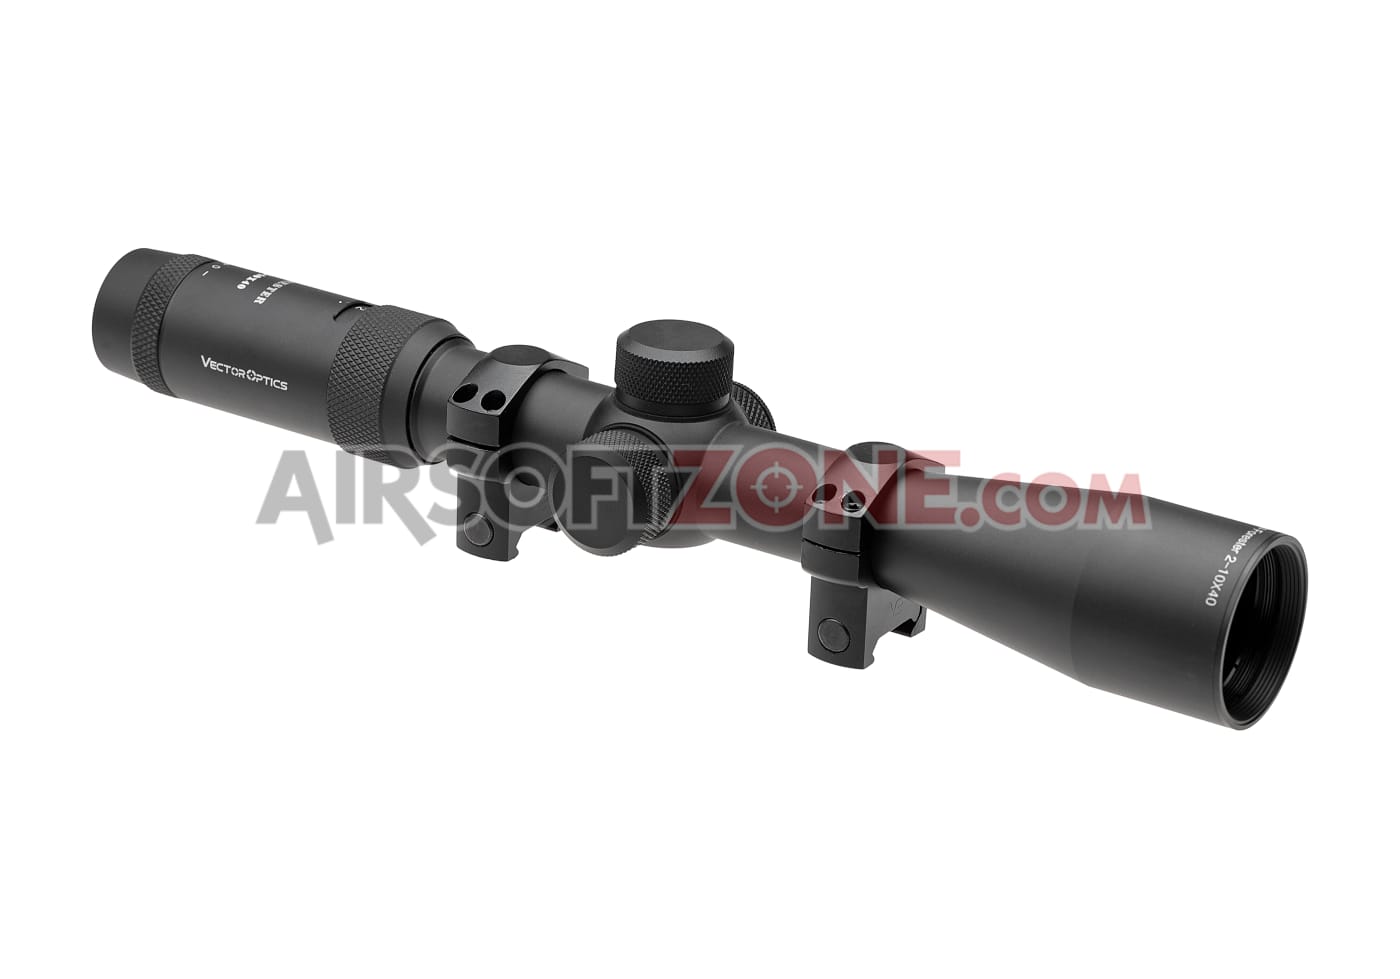 Vector Optics Forester 2-10x40 (2024) - Airsoftzone